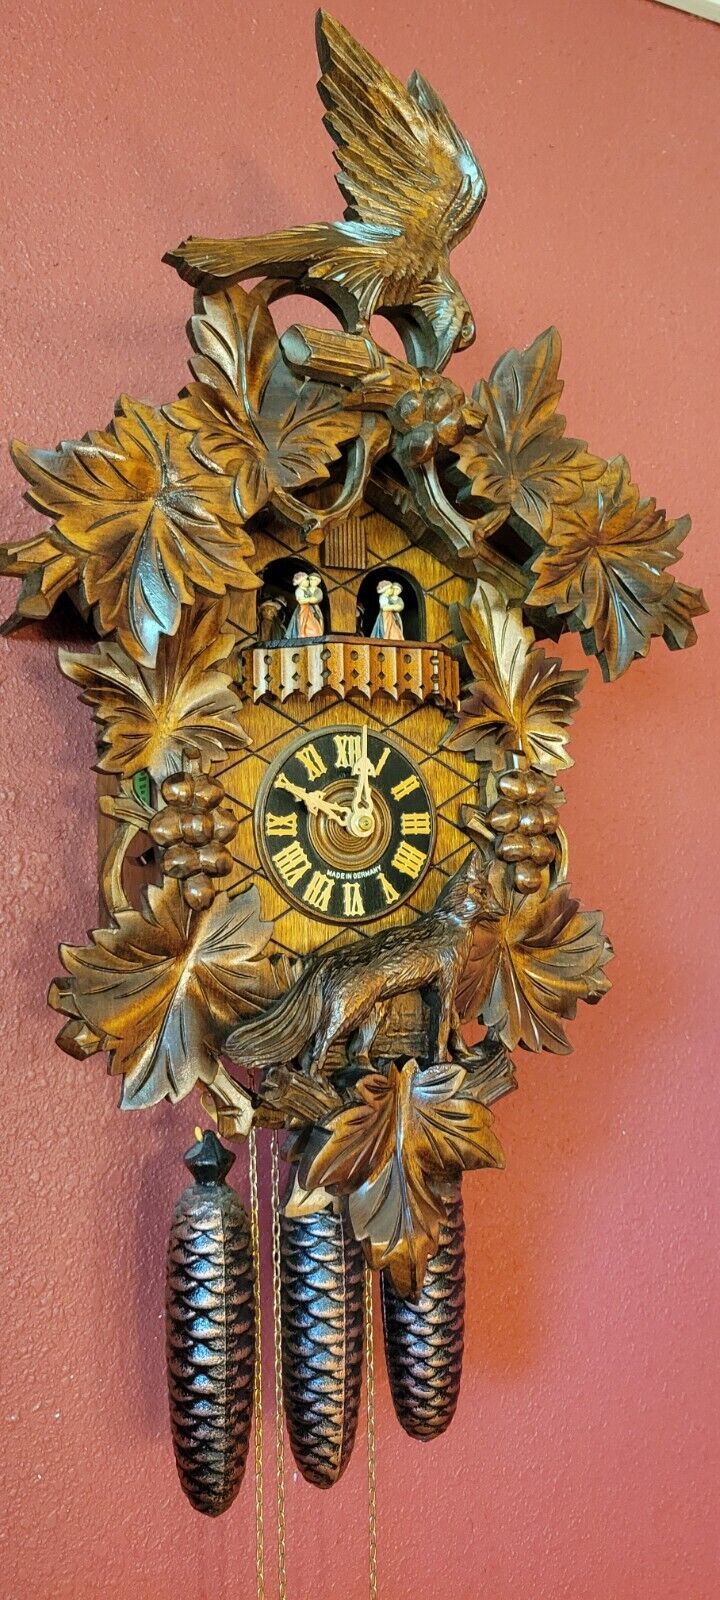 VINTAGE HONES CARVED LIMITED CUCKOO CLOCK 8 DAY PLAYS EDELWEISS FOX GRAPES VIDEO